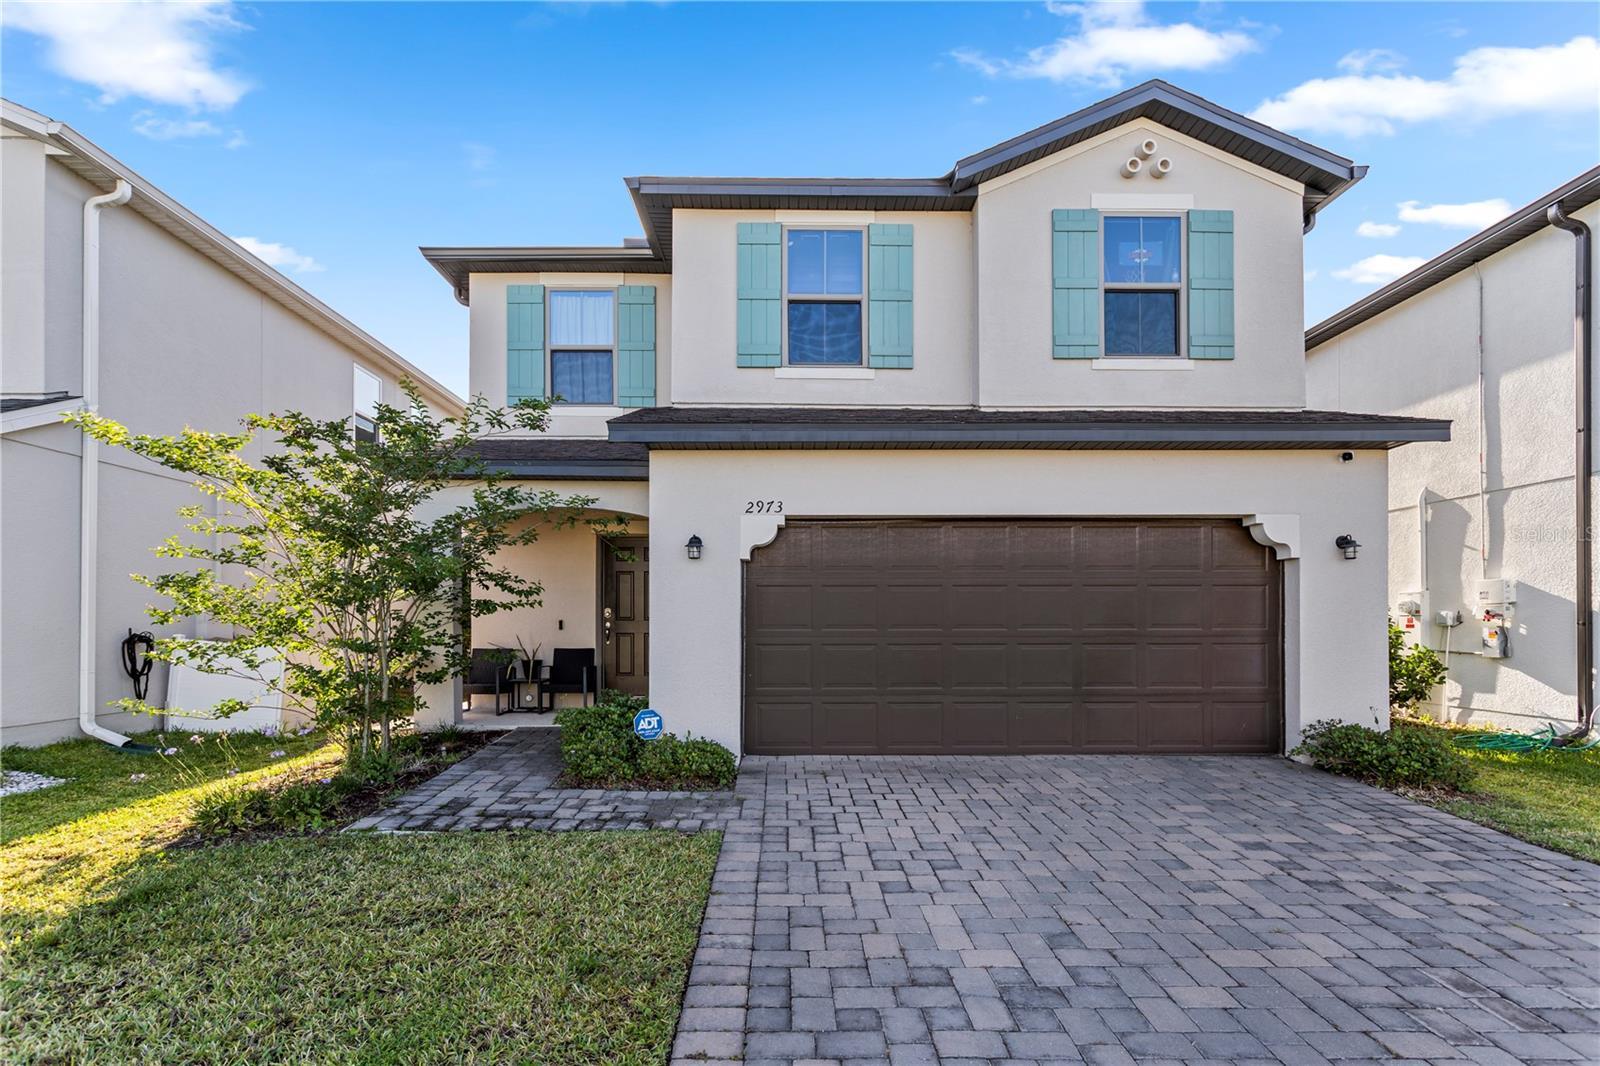 Photo one of 2973 Crest Dr Kissimmee FL 34744 | MLS O6201583